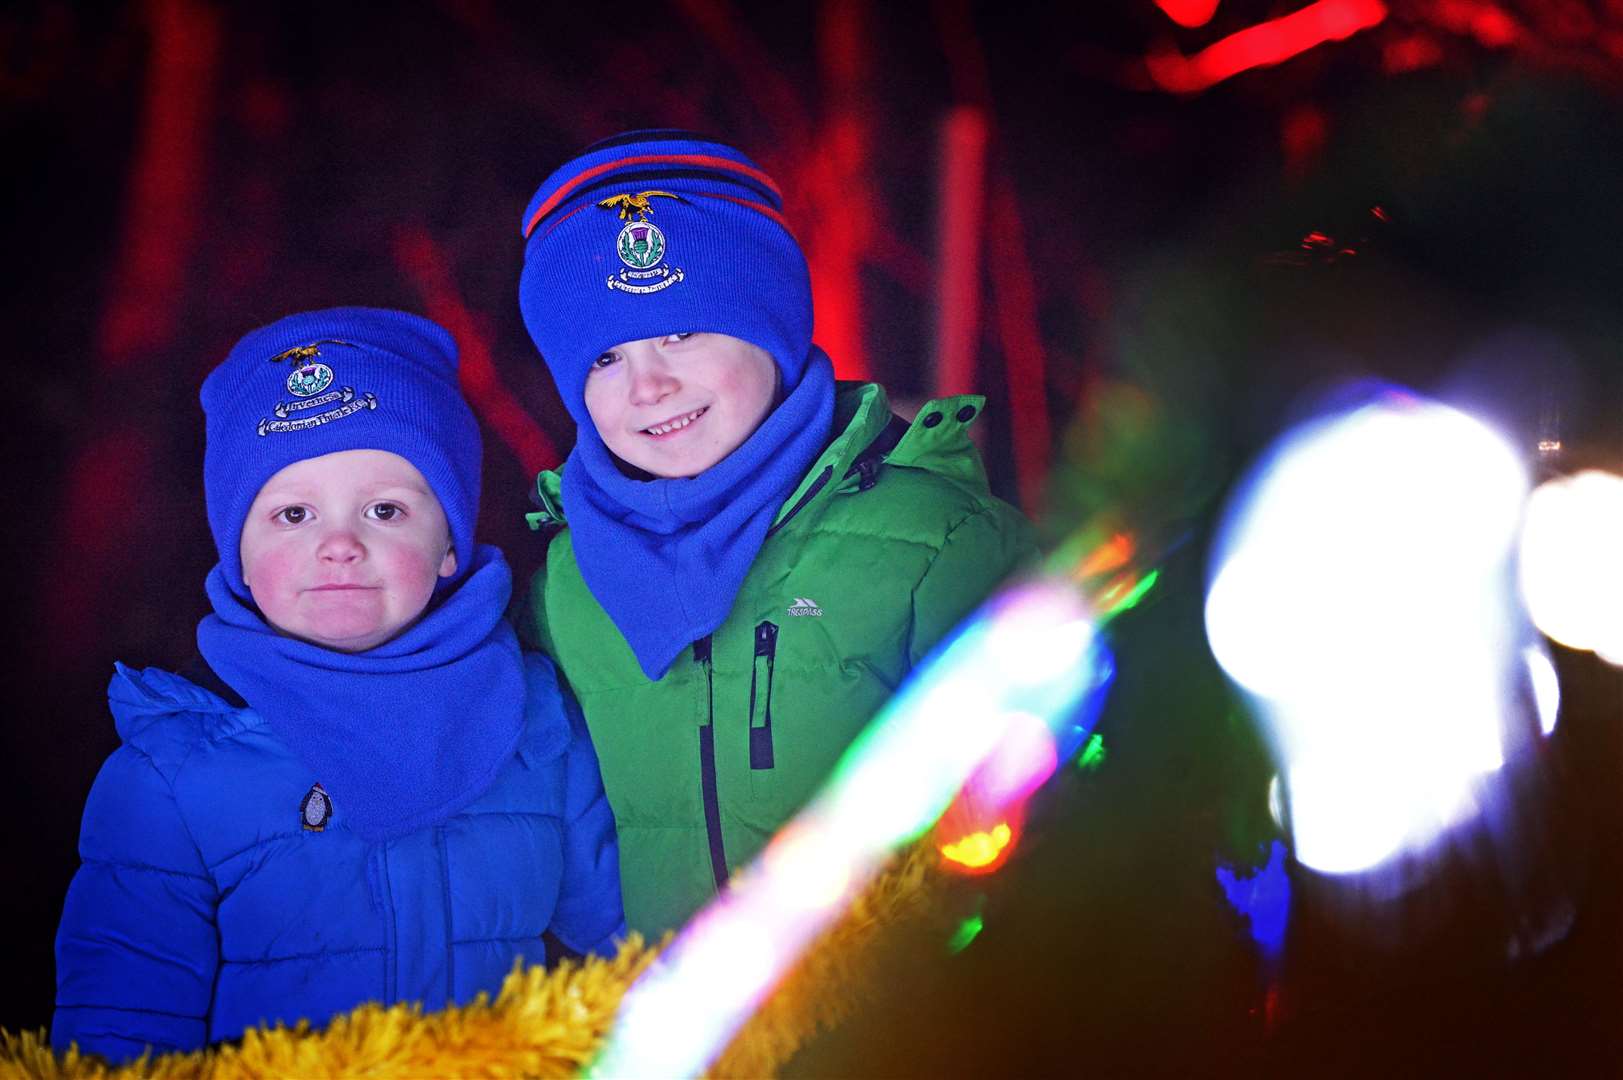 Winter Wonderland 2018..Brothers Euan Grant (3) and Seumas Grant (6) from Avoch...Winter Wonderland 2018.Picture: Gair Fraser. Image No. 042785..